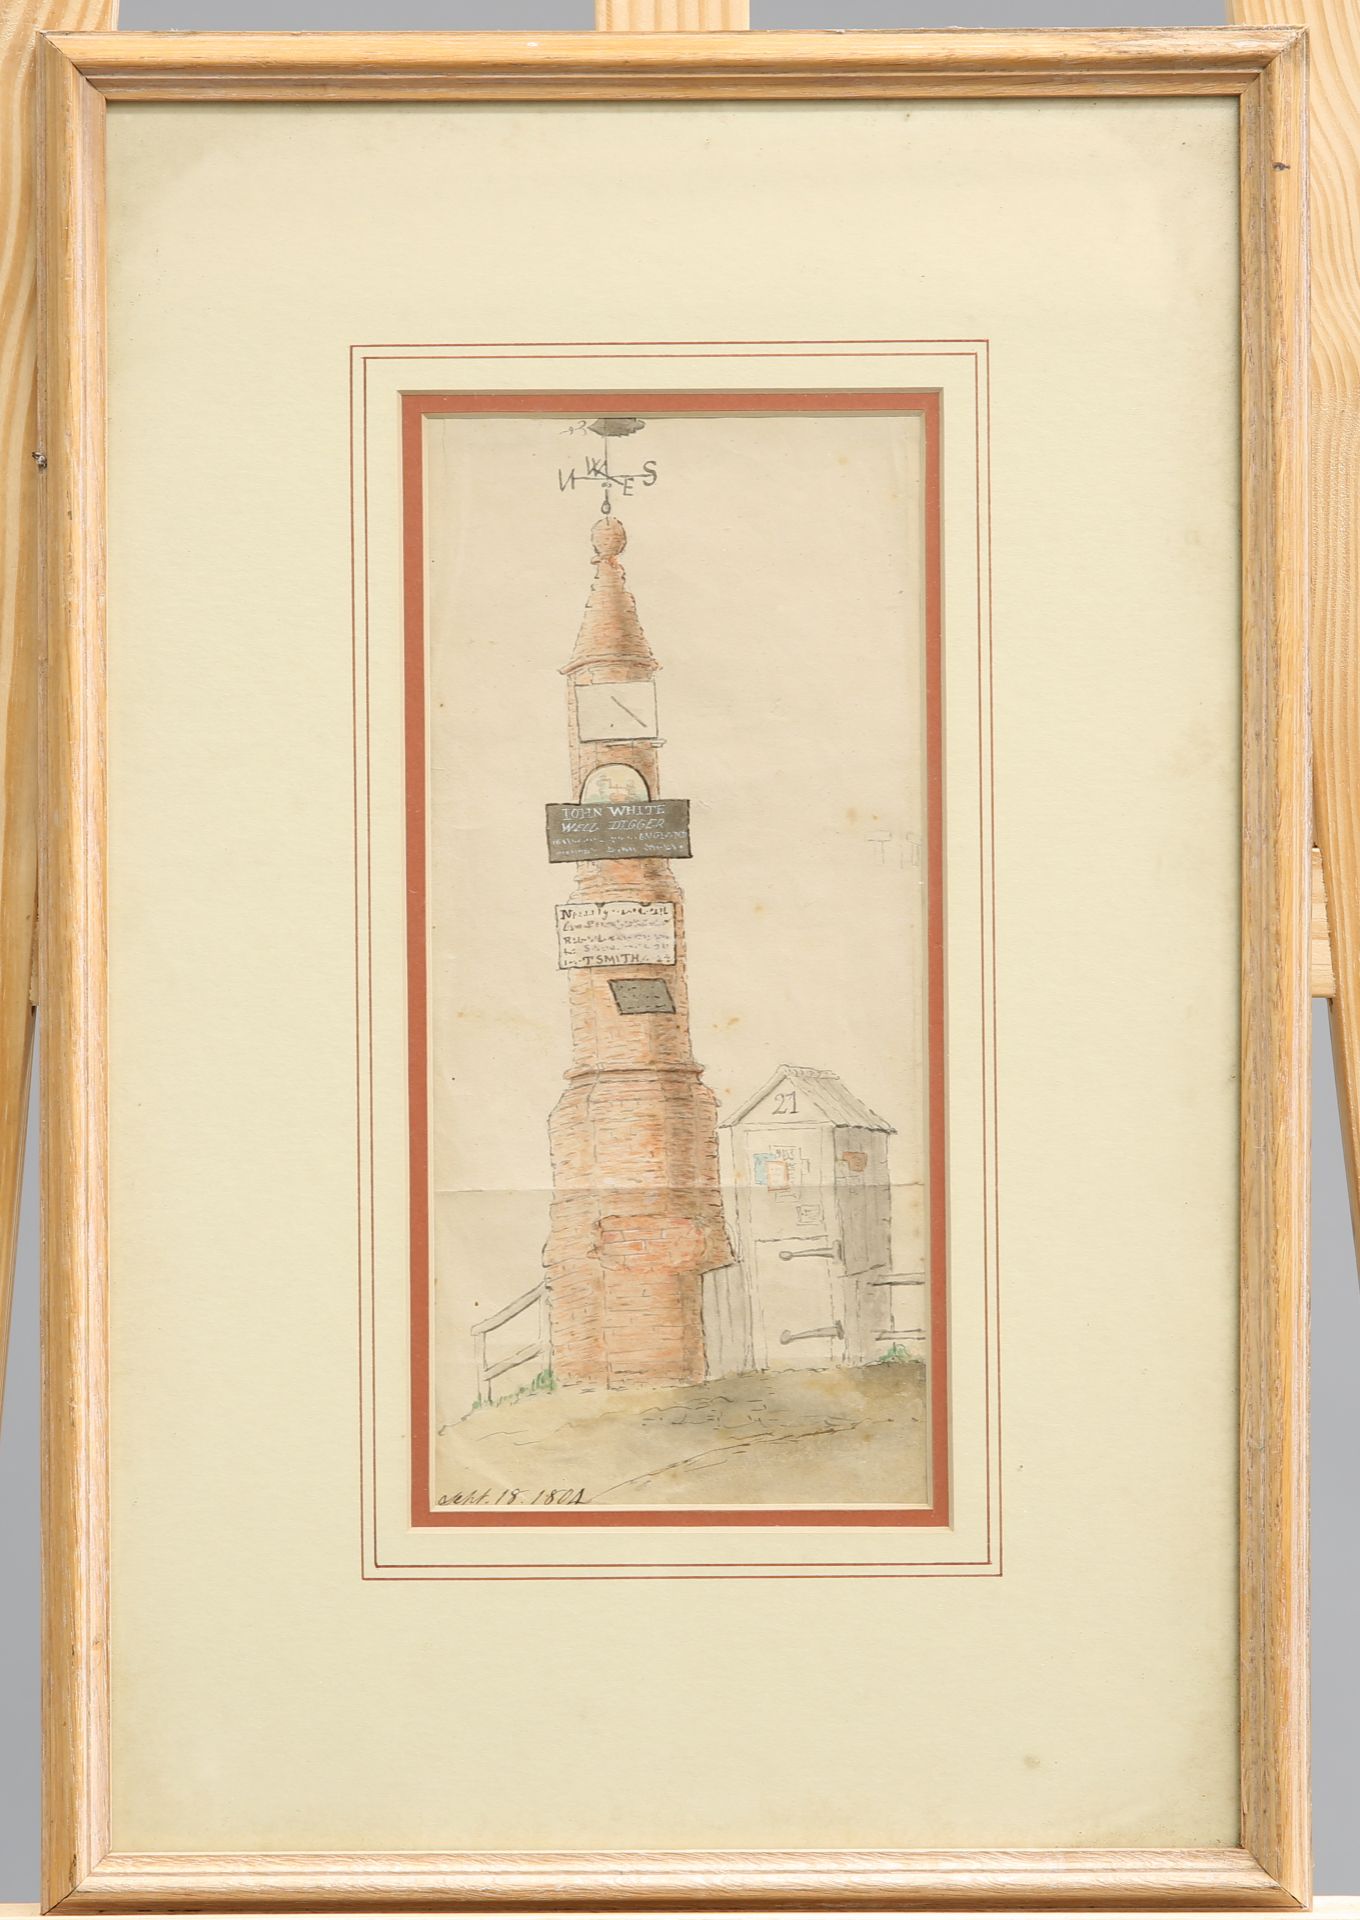 ~ ENGLISH SCHOOL, THE WELL DIGGER, dated Sept. 18. 1804 lower left, watercolour, framed, 25cm by